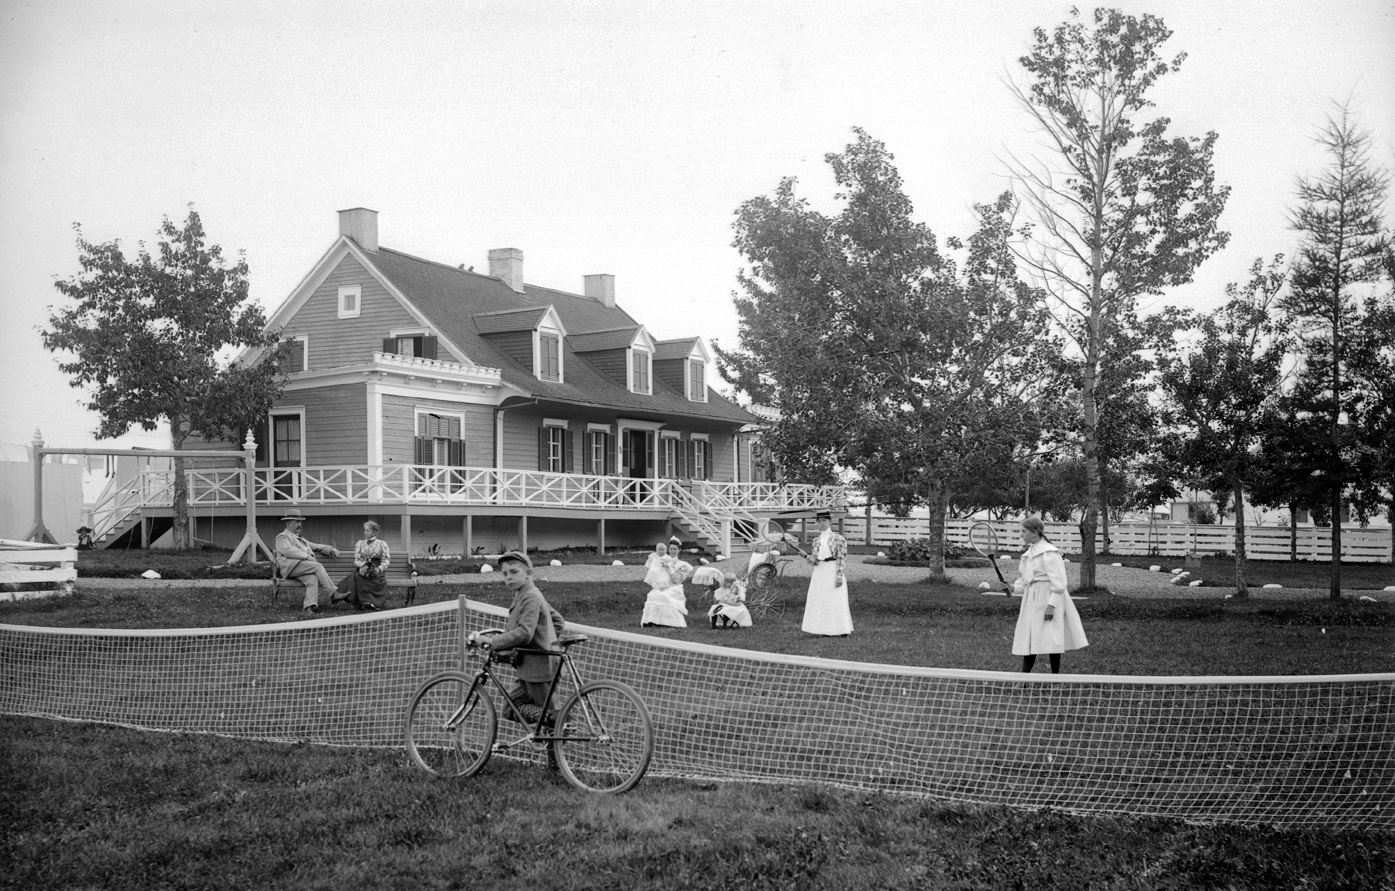 A family enjoying summer in front of a posh house and a child riding a bicycle, while others play tennis or talk.